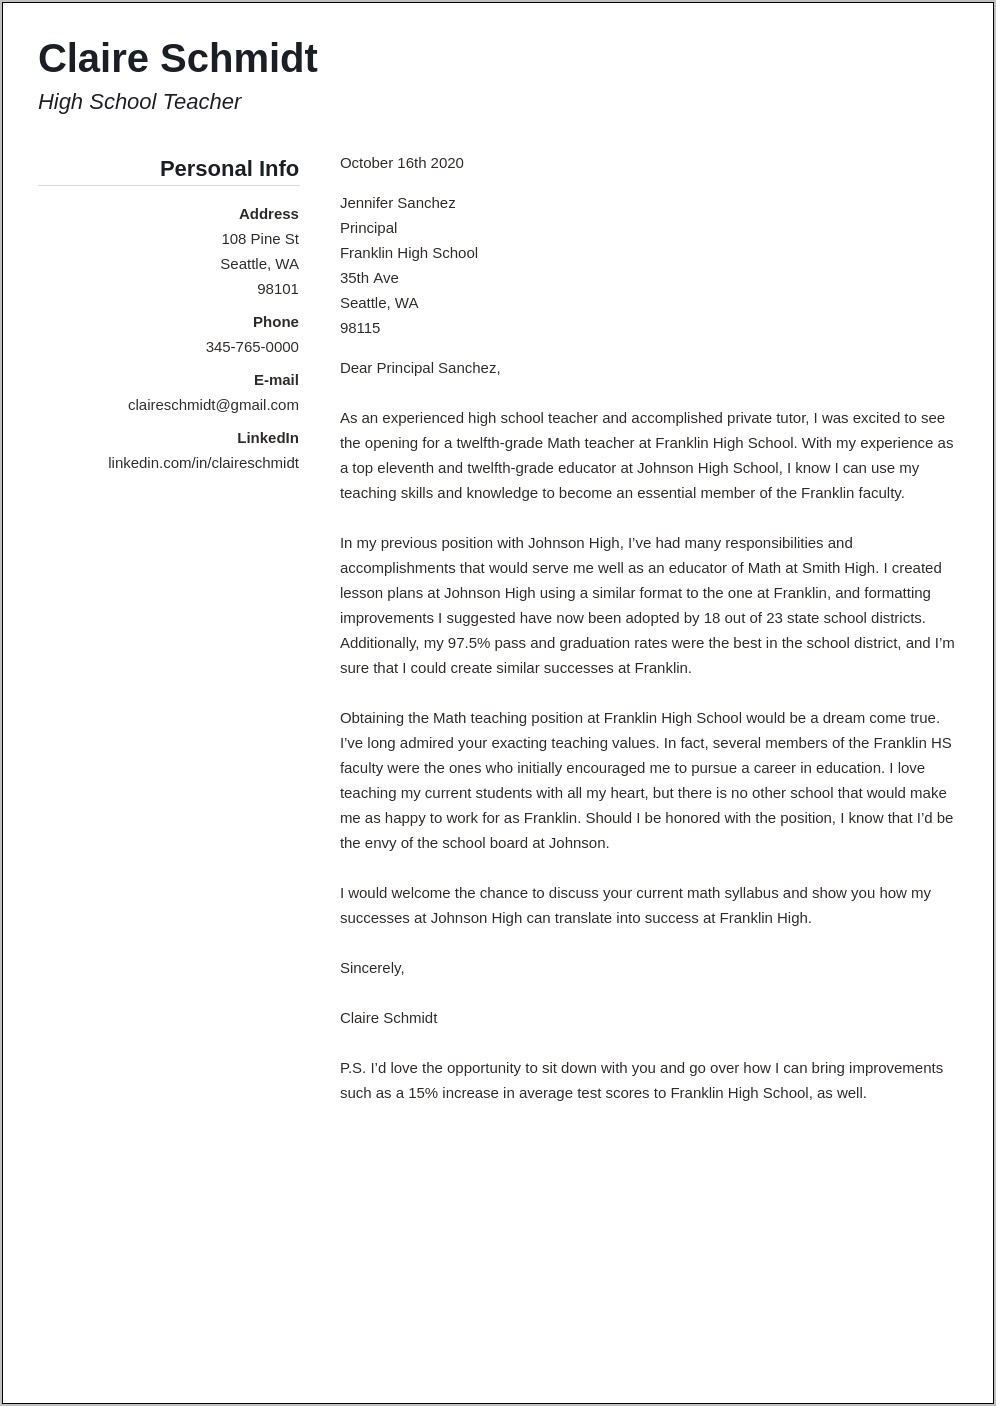 Examples Of Online Resumes And Cover Letters